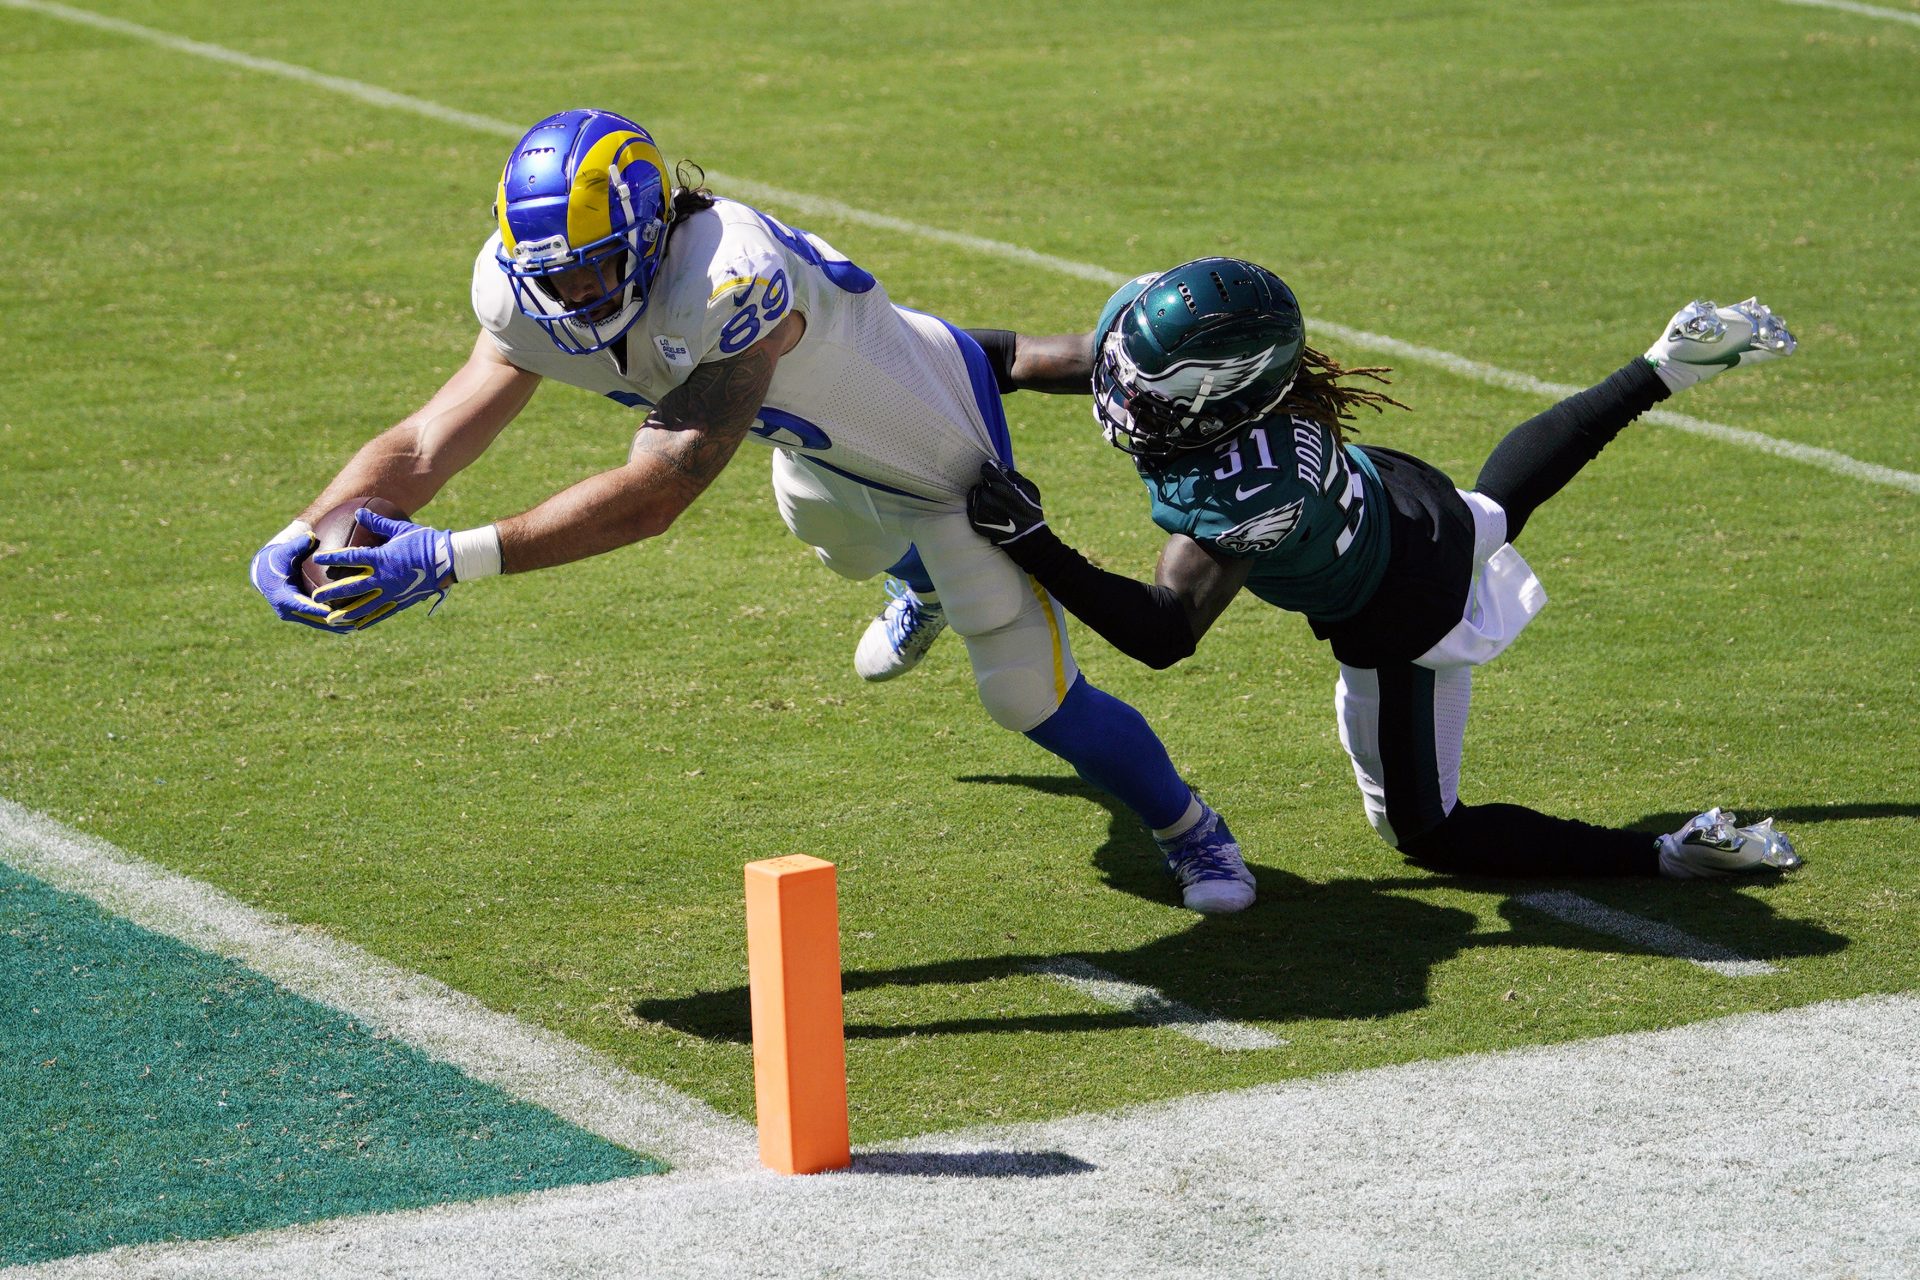 Los Angeles Rams' Tyler Higbee, left, reaches for a touchdown against Philadelphia Eagles' Nickell Robey-Coleman during the first half of an NFL football game, Sunday, Sept. 20, 2020, in Philadelphia.